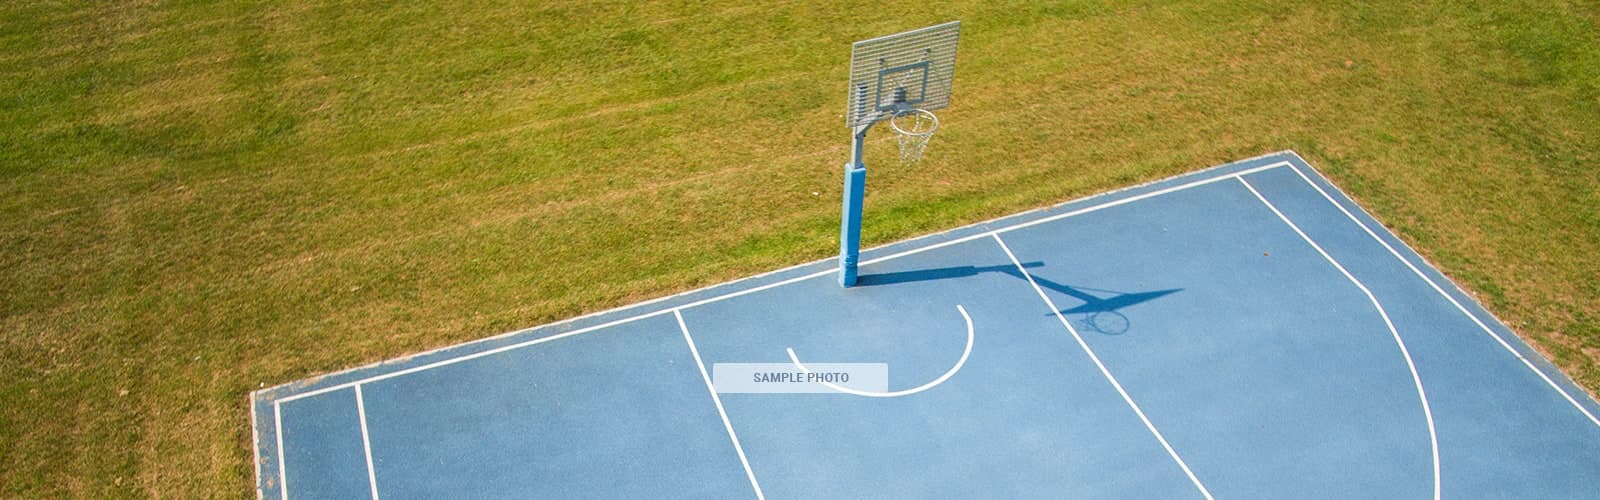 Forts Pond Elementary School Outdoor Basketball Courts in Pelion South Carolina